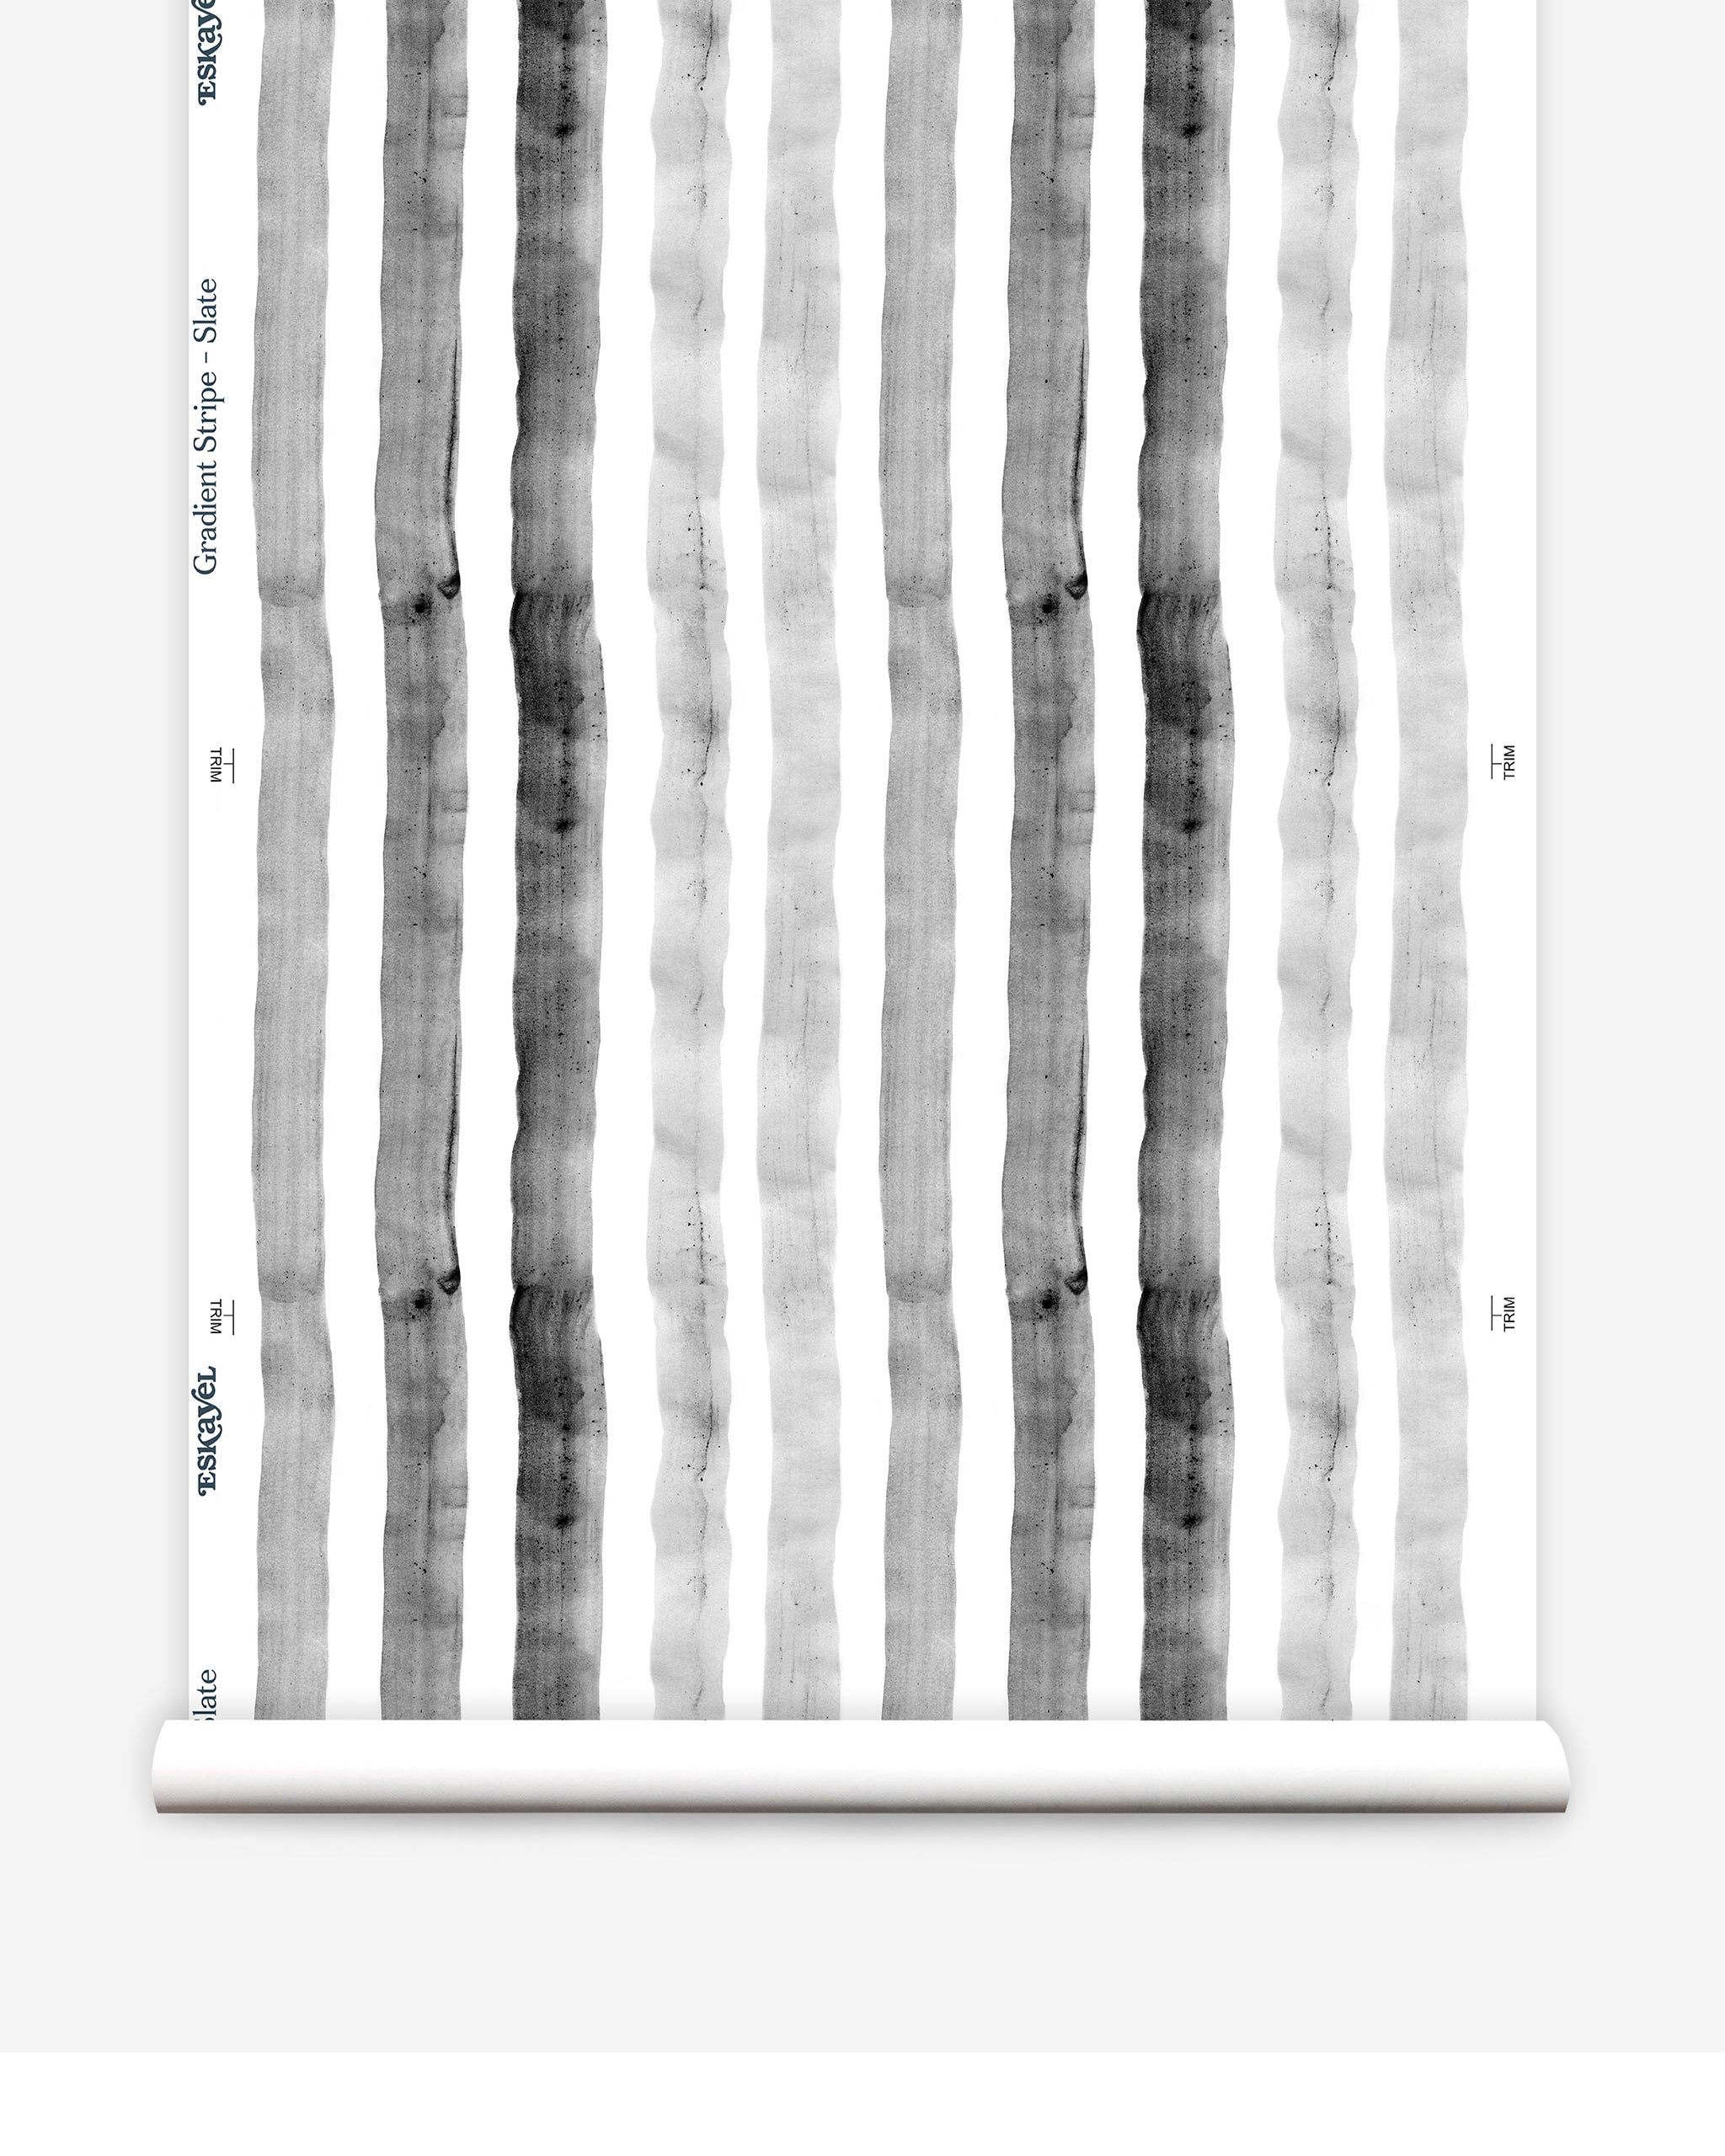 Partially unrolled wallpaper yardage in a painterly stripe print in shades of gray on a white field.